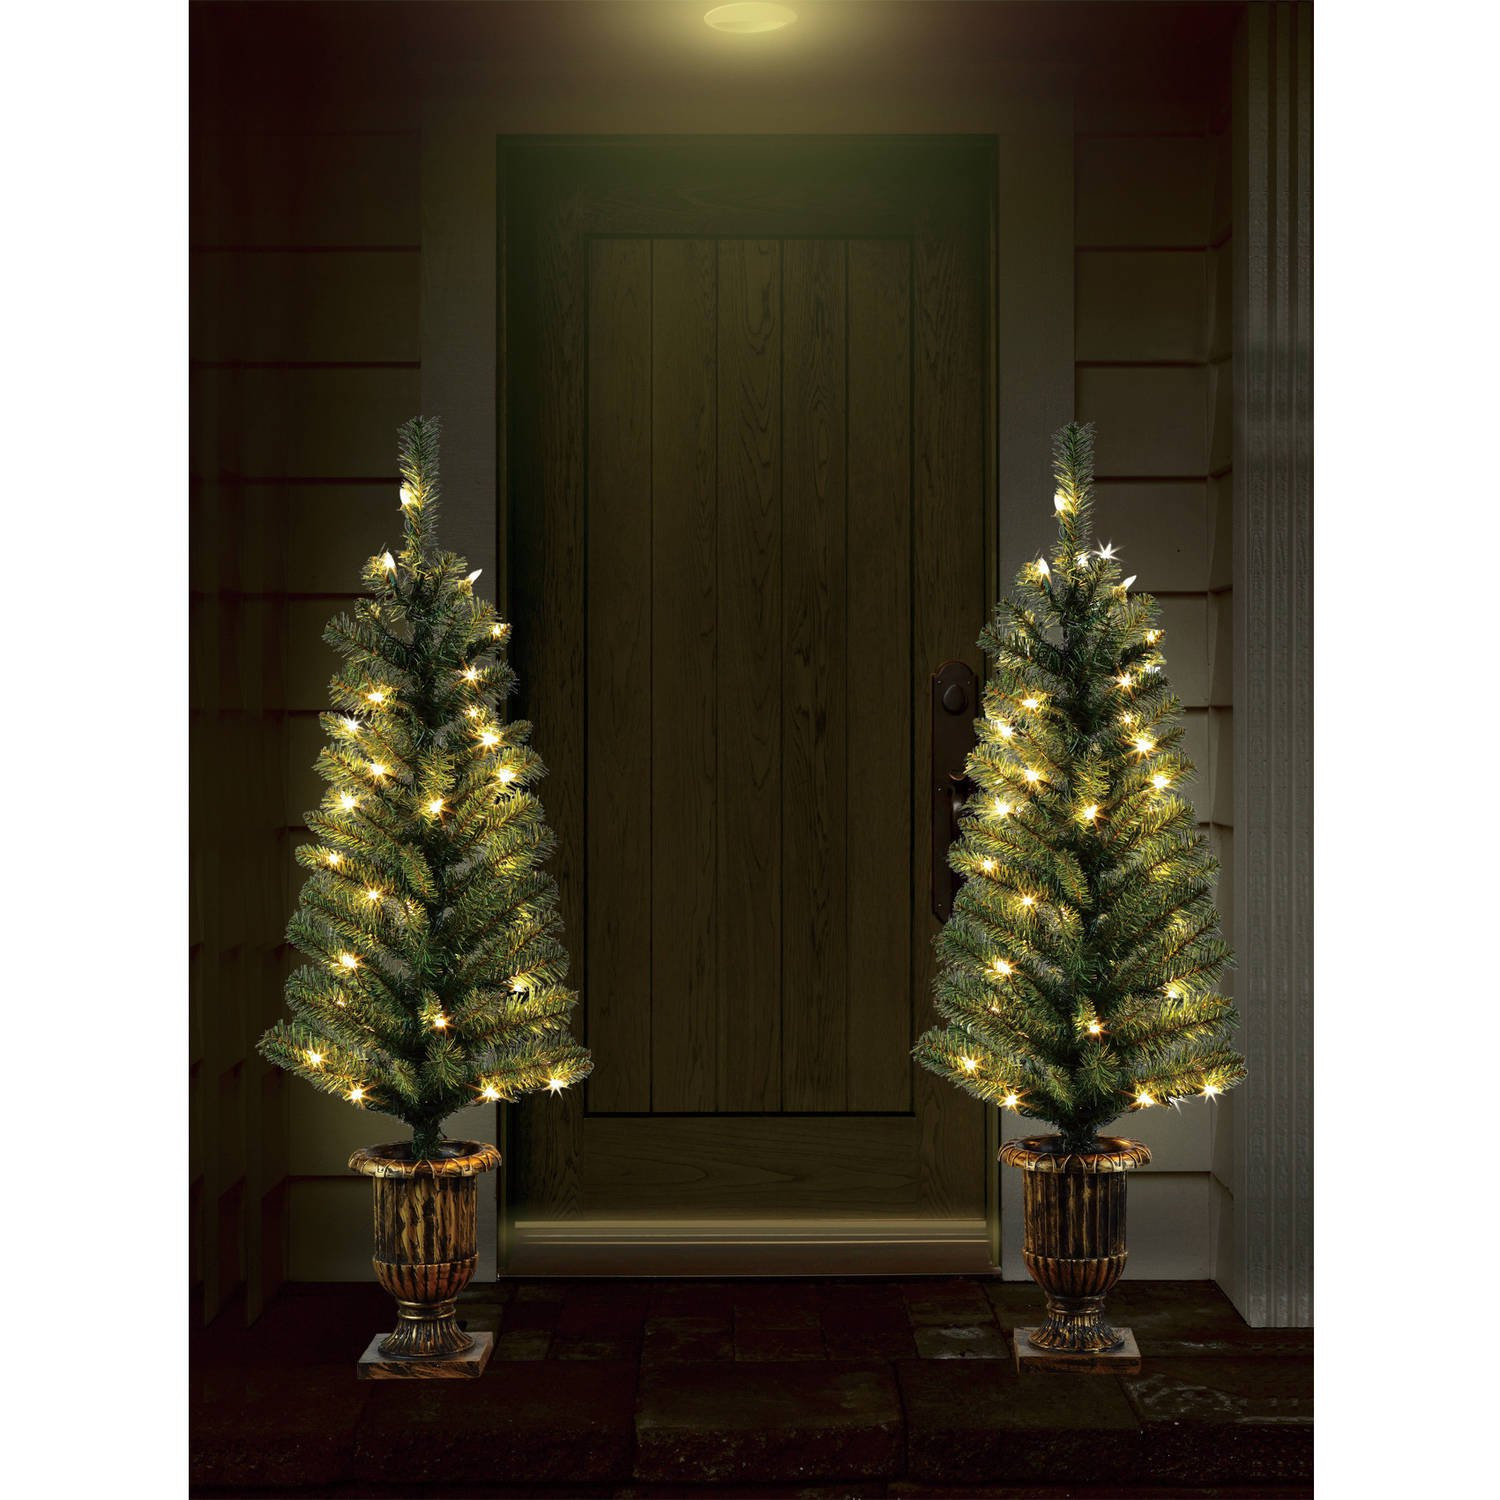 Prelit Entryway Christmas Trees
 4 Pre Lit Northern Dunhill Fir Full Artificial Christmas